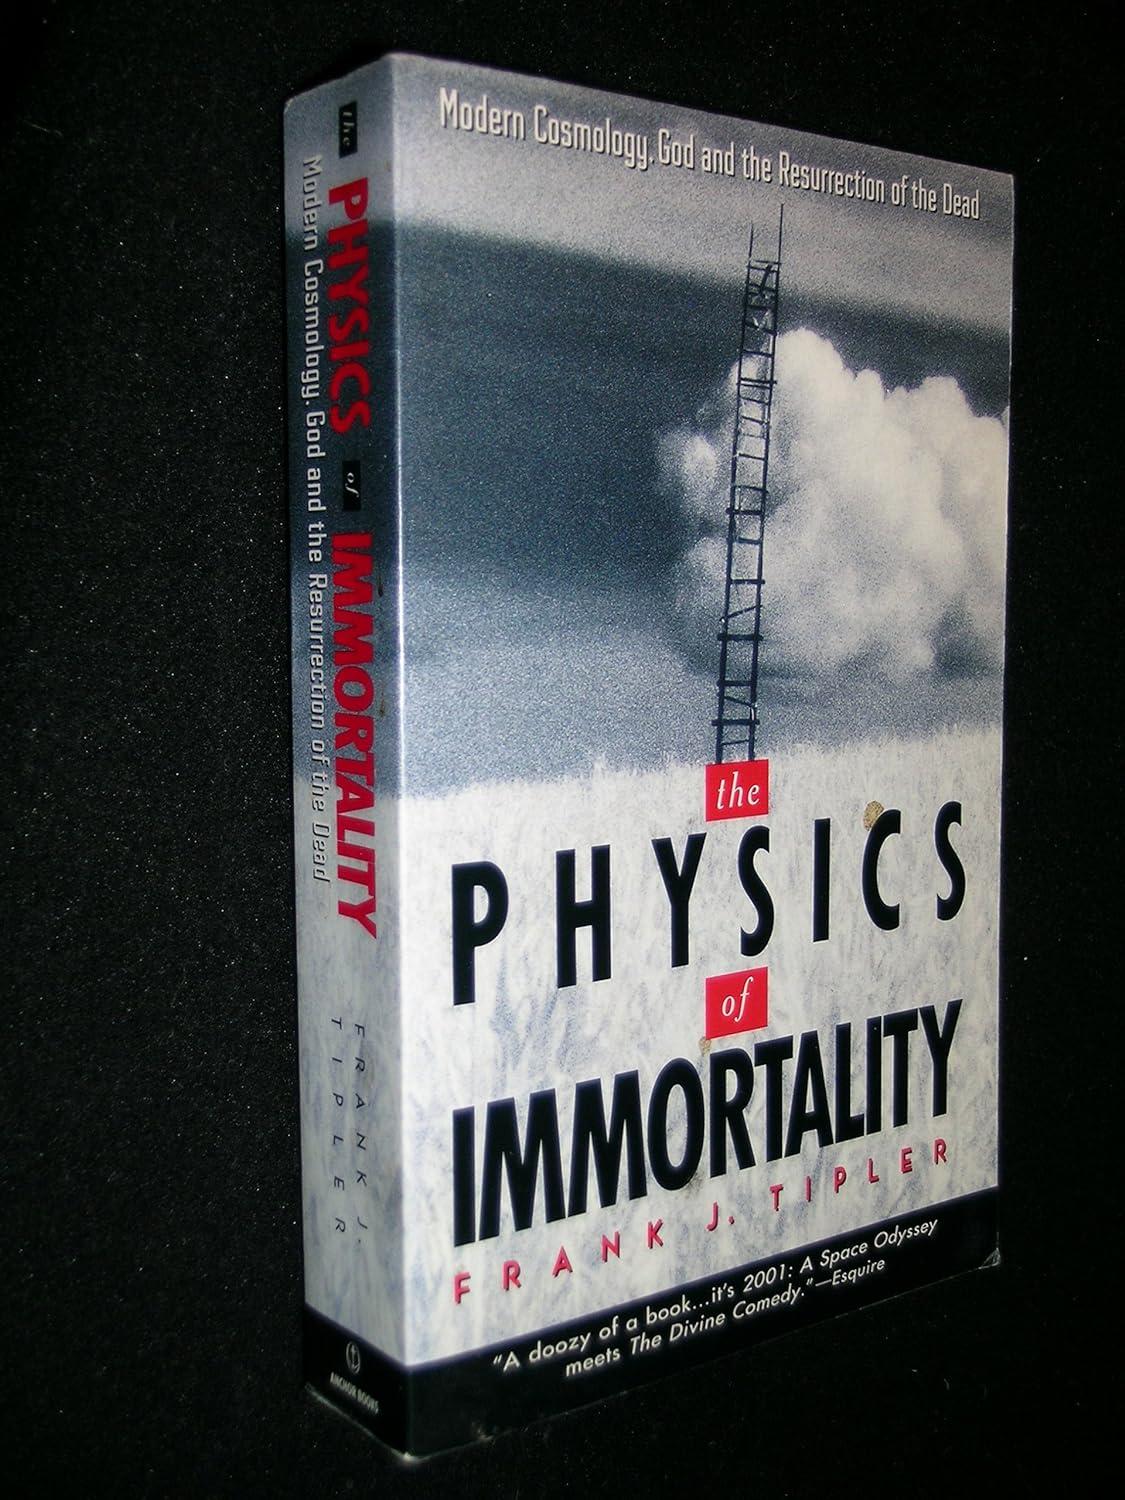 the physics of immortality modern cosmology god and the resurrection of the dead 1st edition frank j. tipler